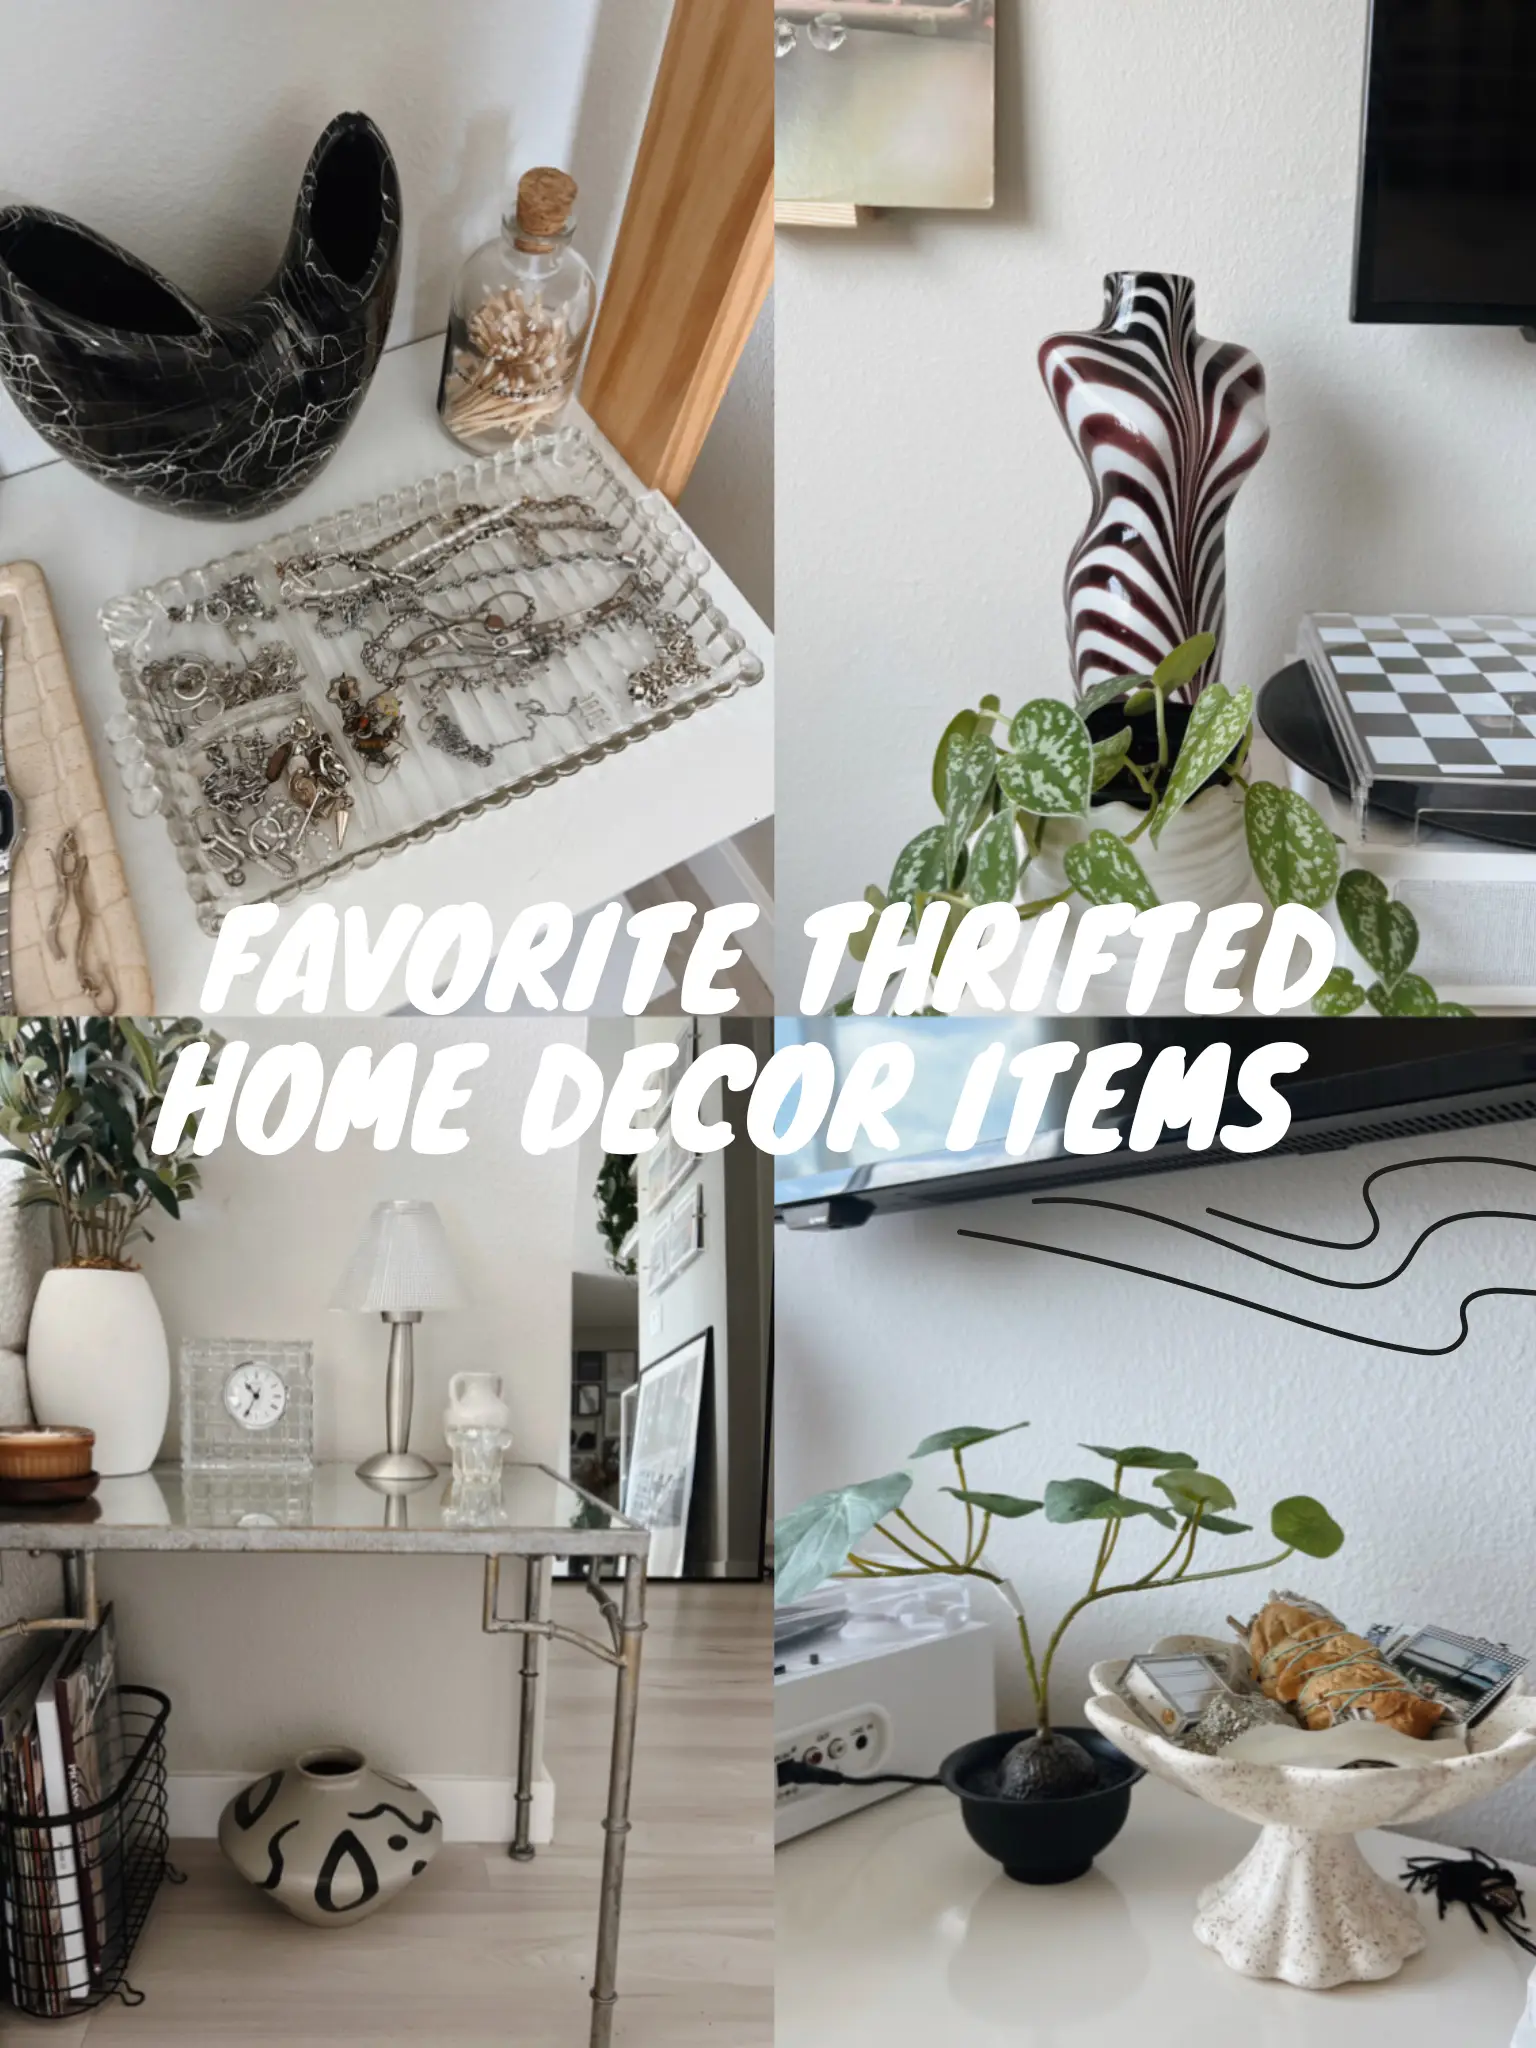 Favorite Thrifted Home Decor Items | Gallery posted by Kiaracol ...